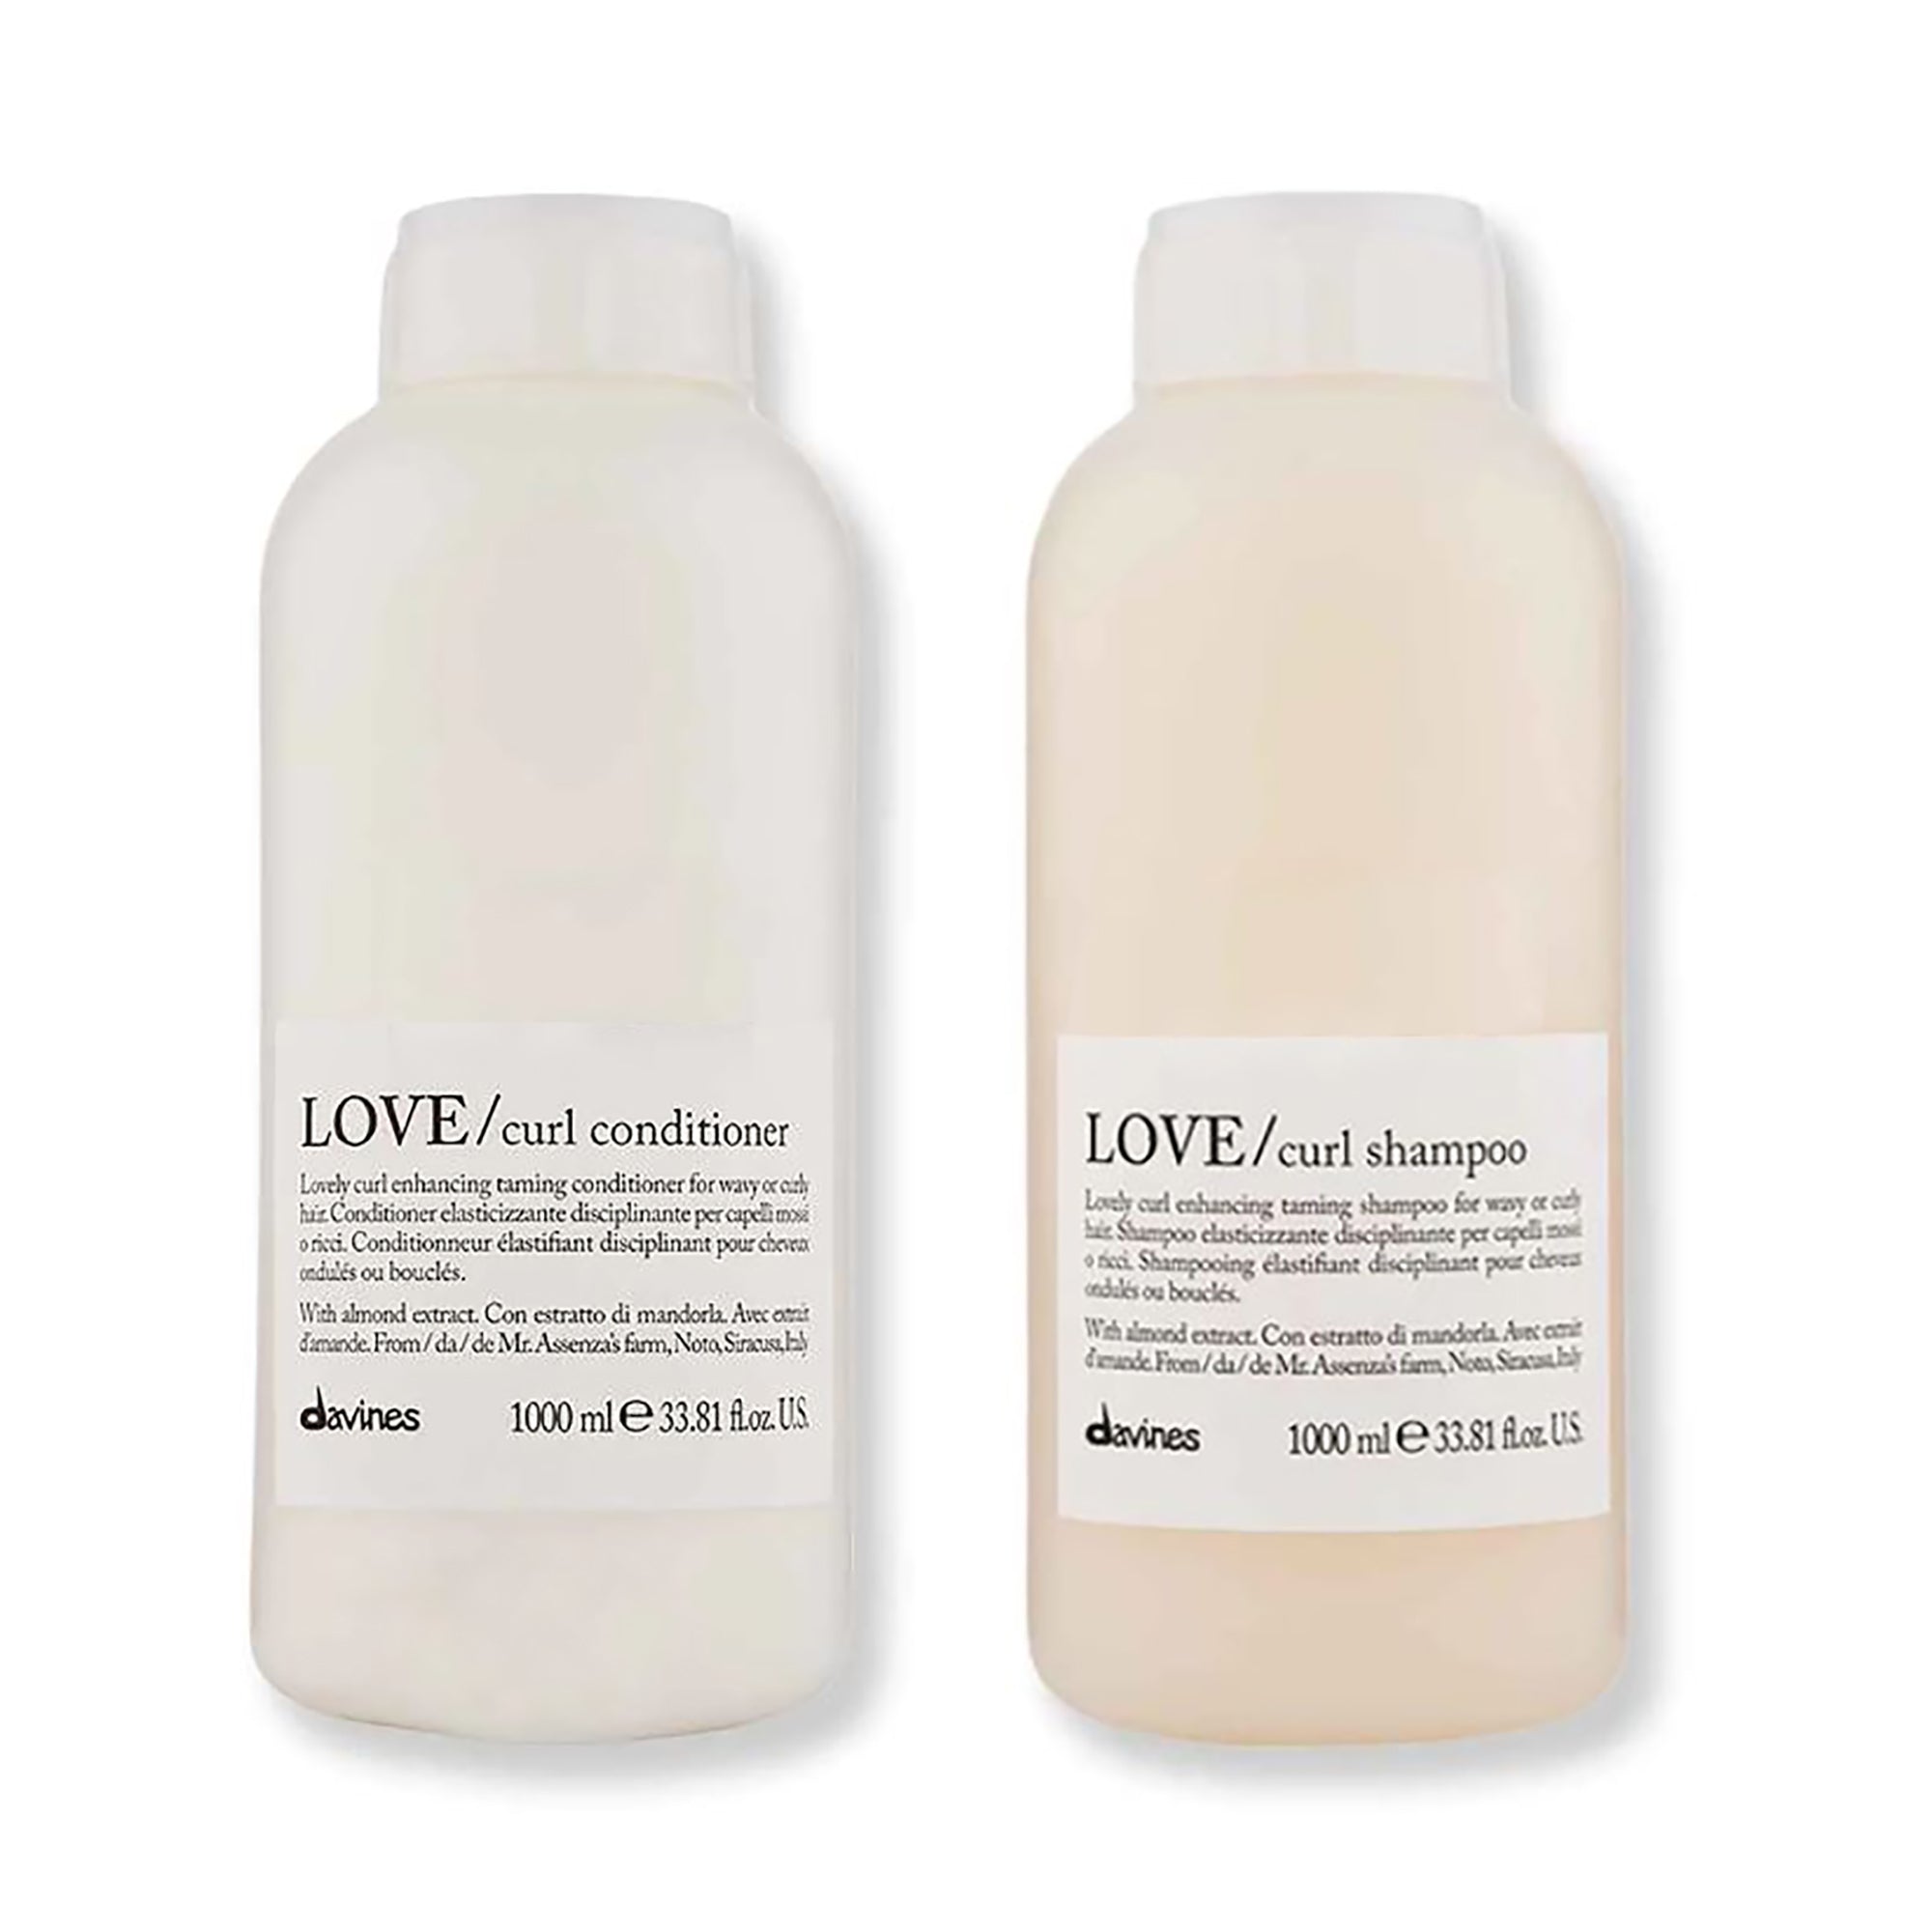 Svane Fearless Prøve Davines Love Curl Shampoo and Conditioner - Planet Beauty